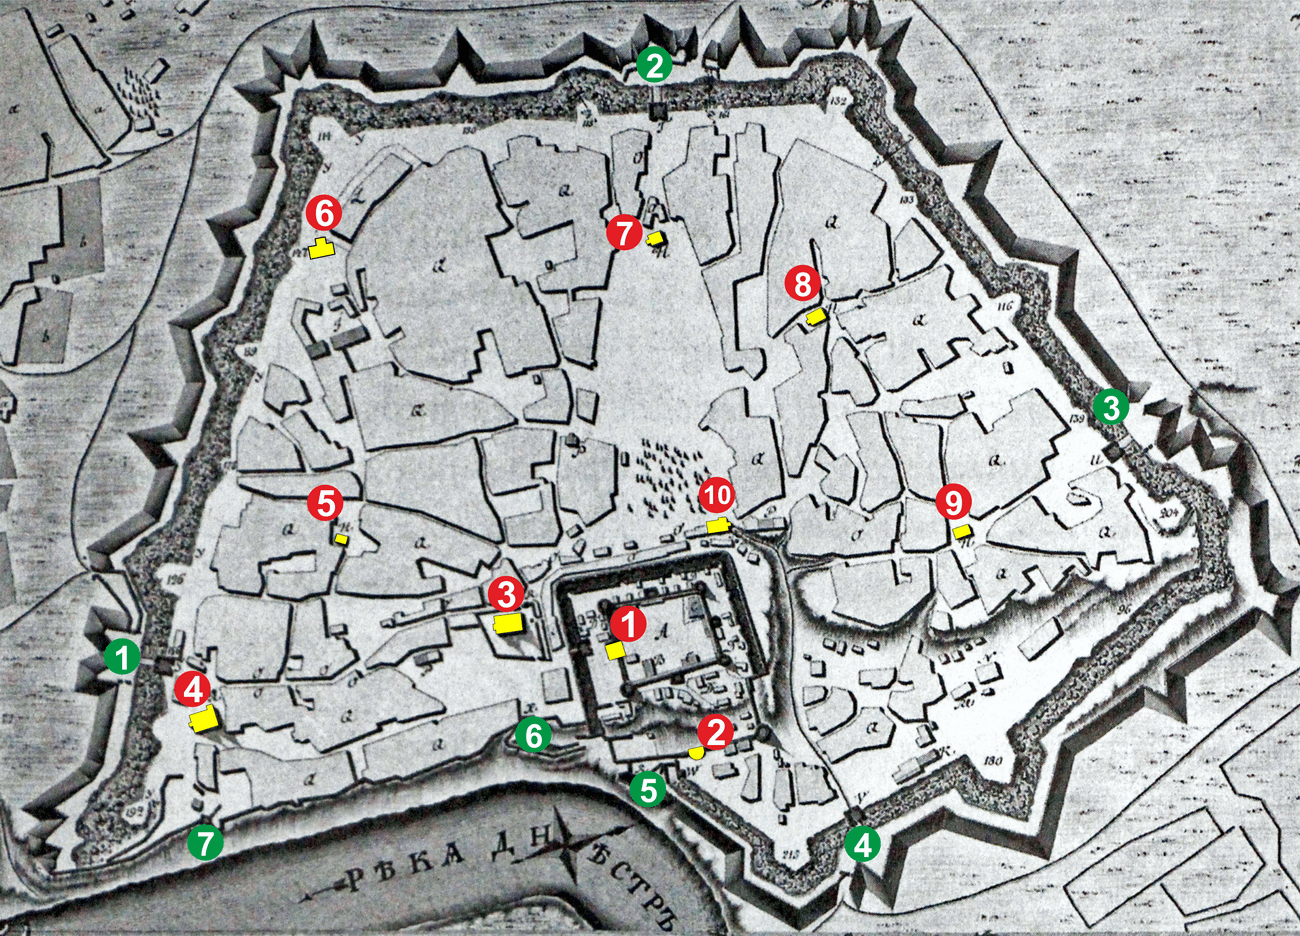  1790 map showing mosques highlighted with reference to gates